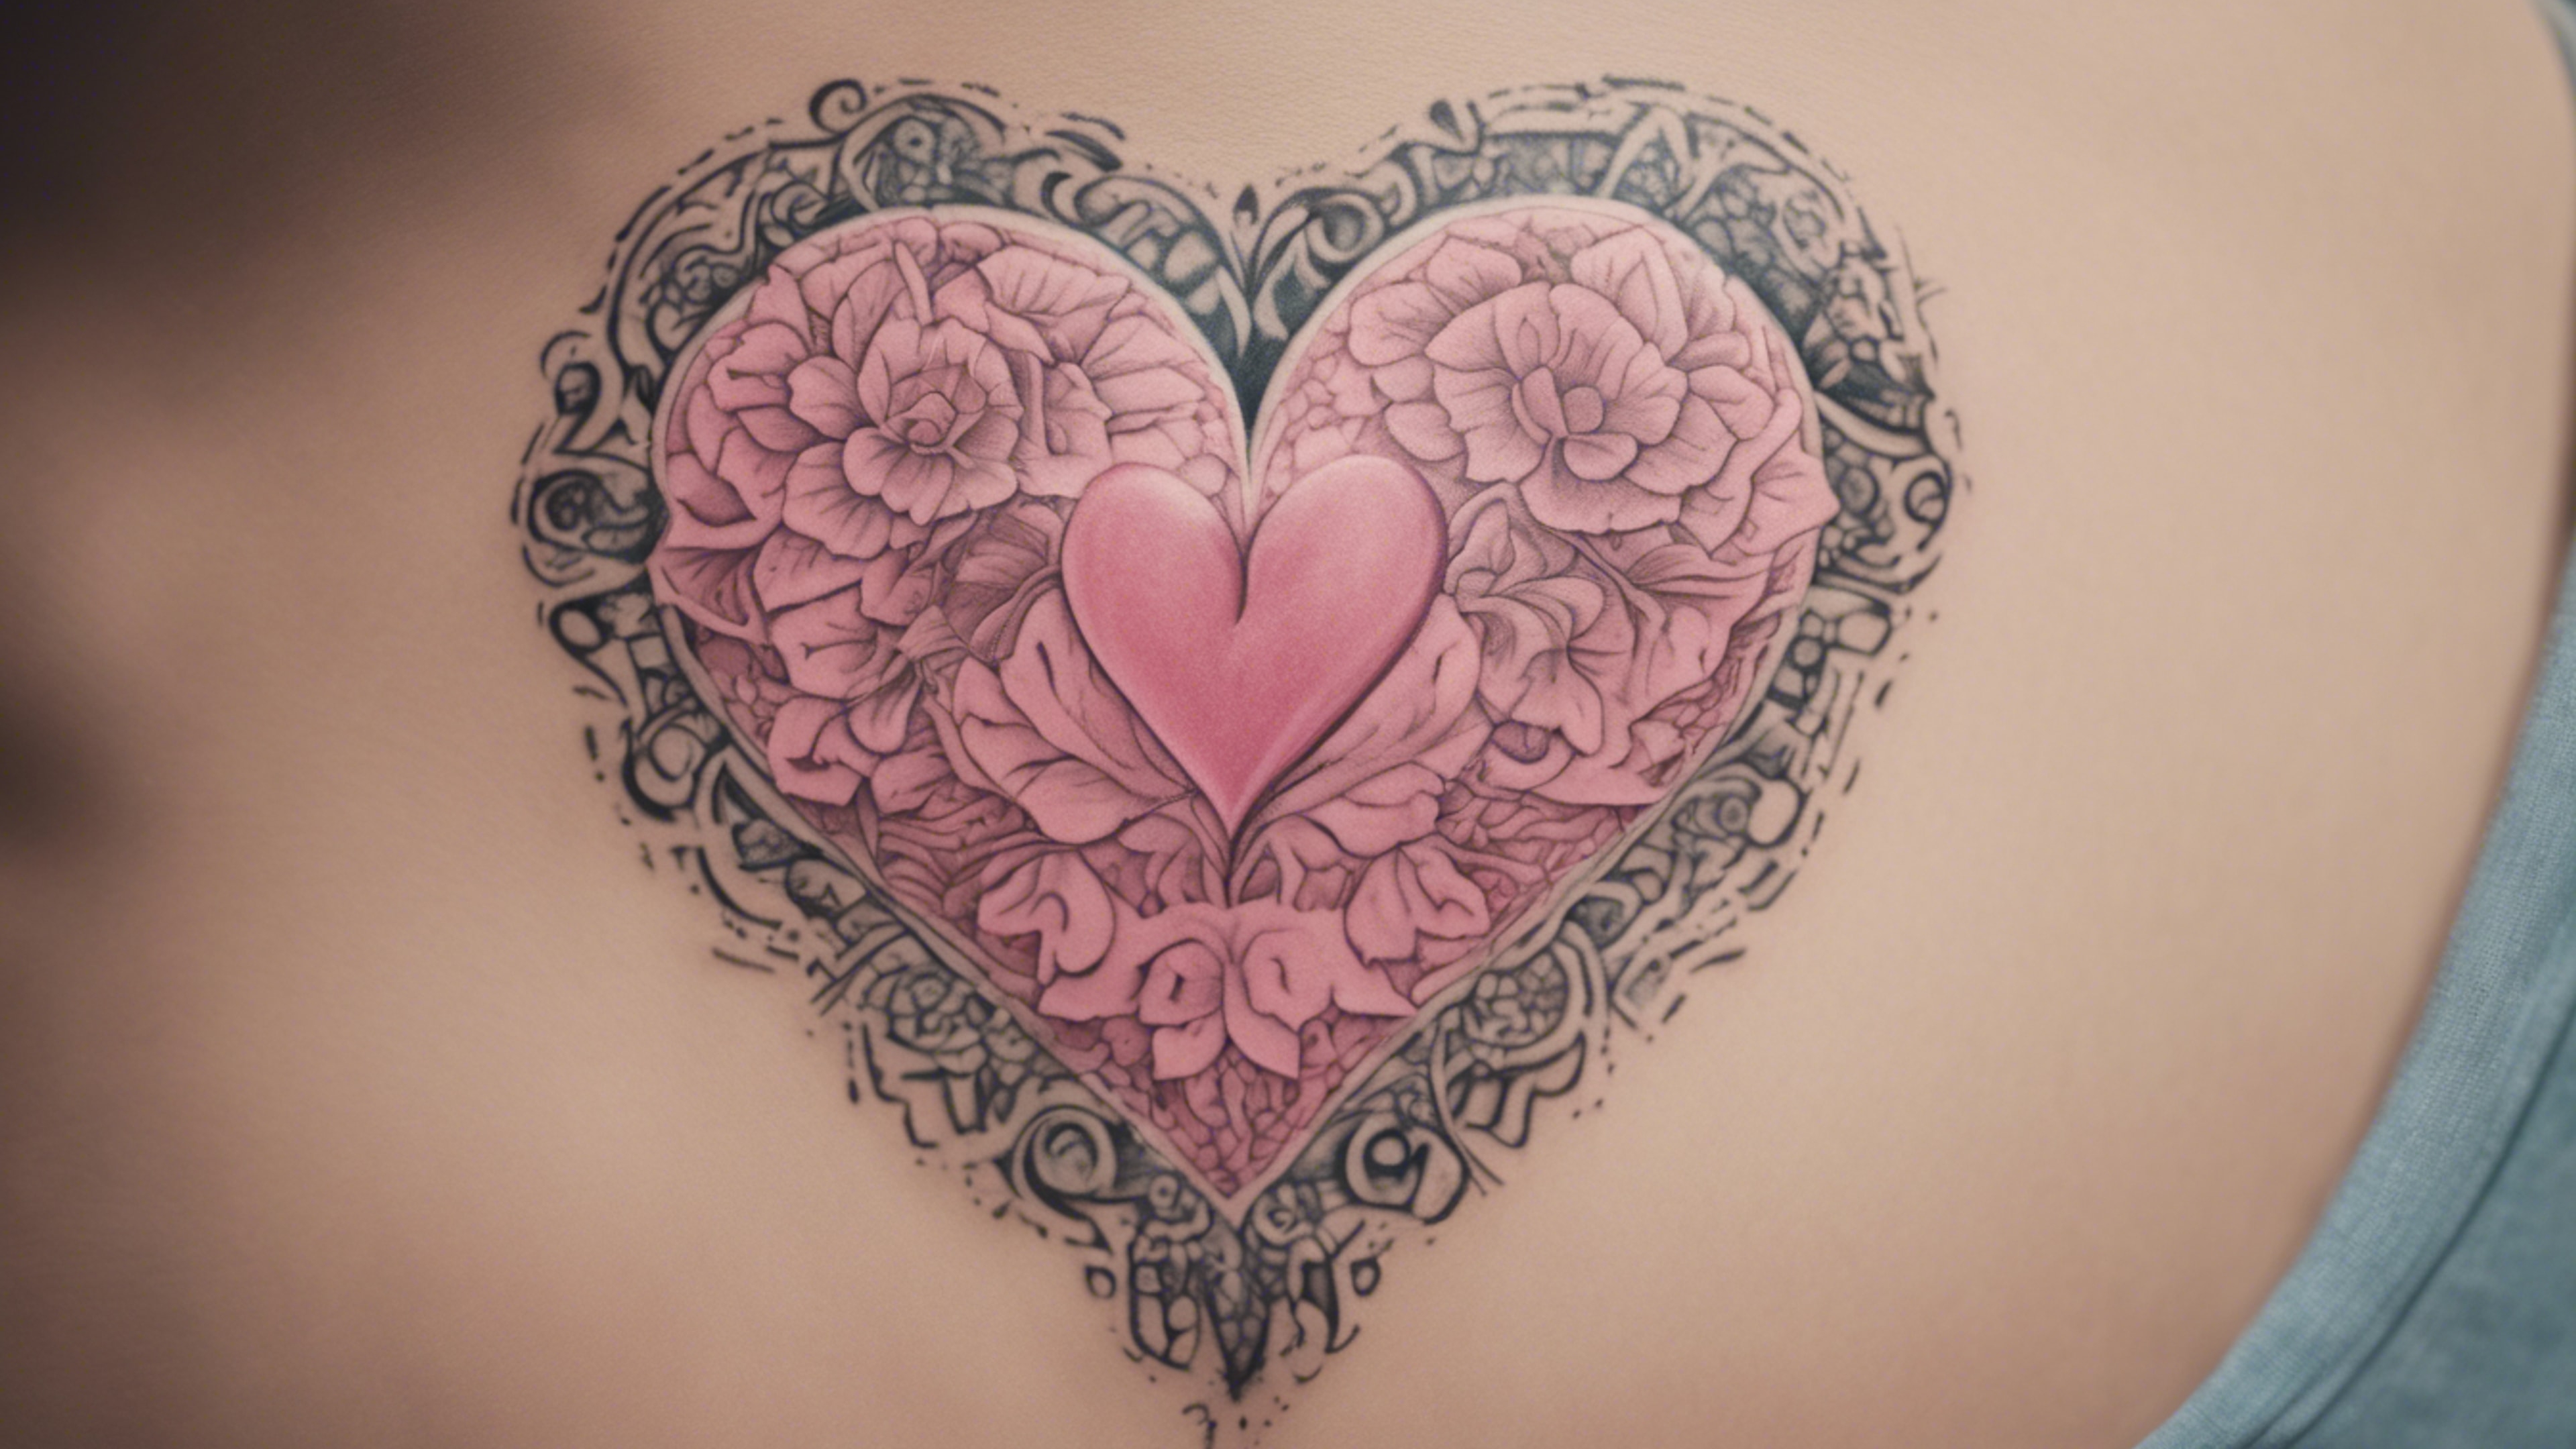 A small pink heart shaped tattoo embellished with intricate floral patterns. ផ្ទាំង​រូបភាព[dd23c5855ab44f40b2fe]